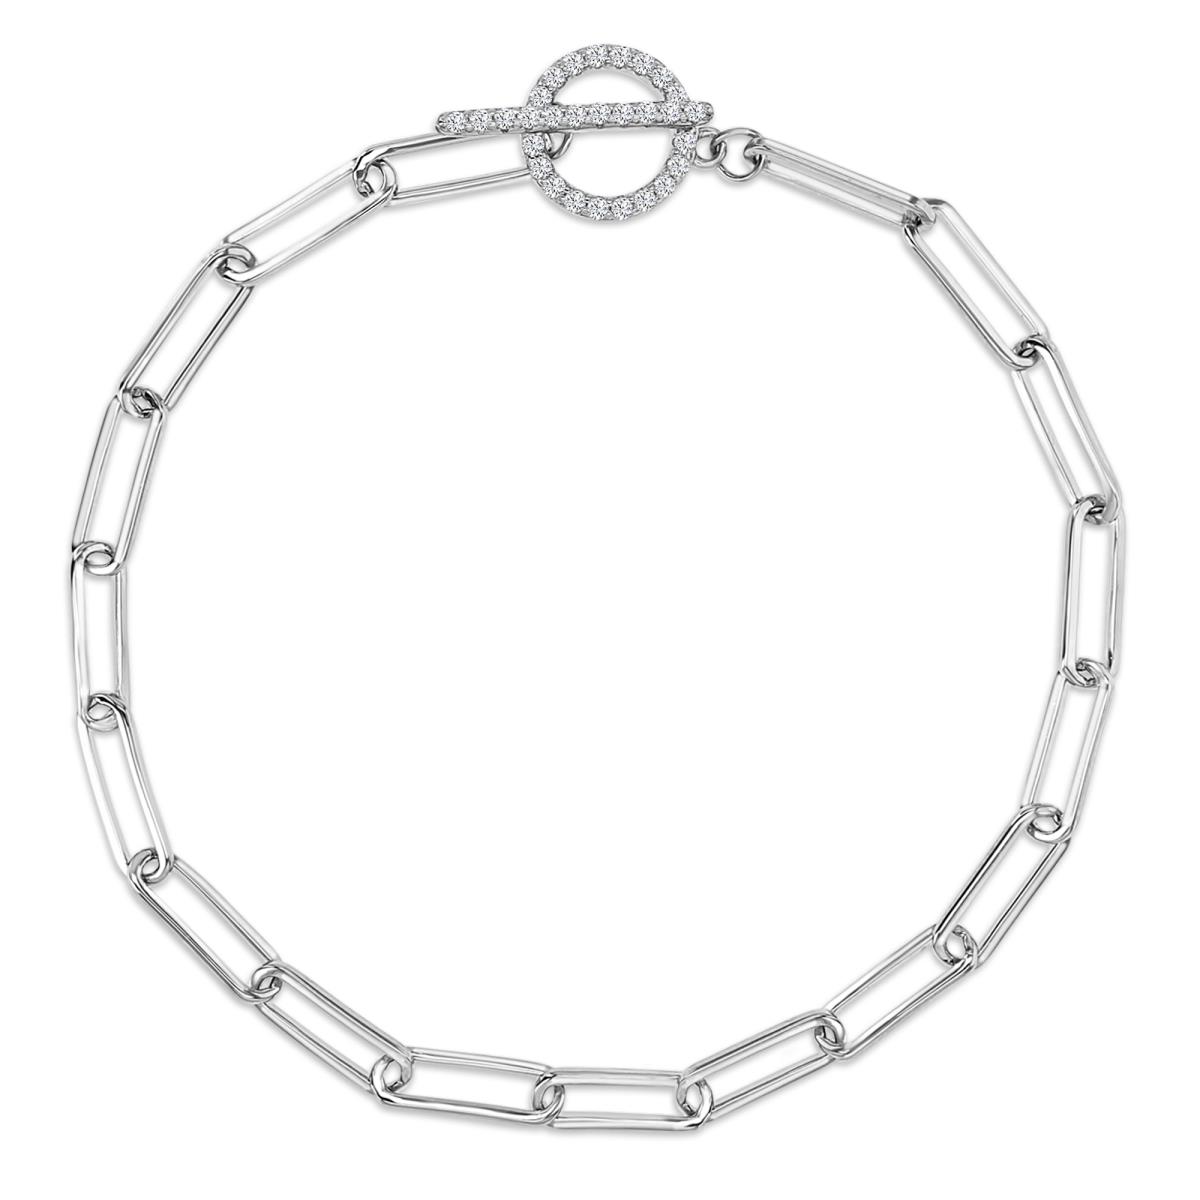 EXCLUSIVE RM Sterling Silver Rhodium 3.5mm Paperclip 7.25" Chain Bracelet with CZ Toggle